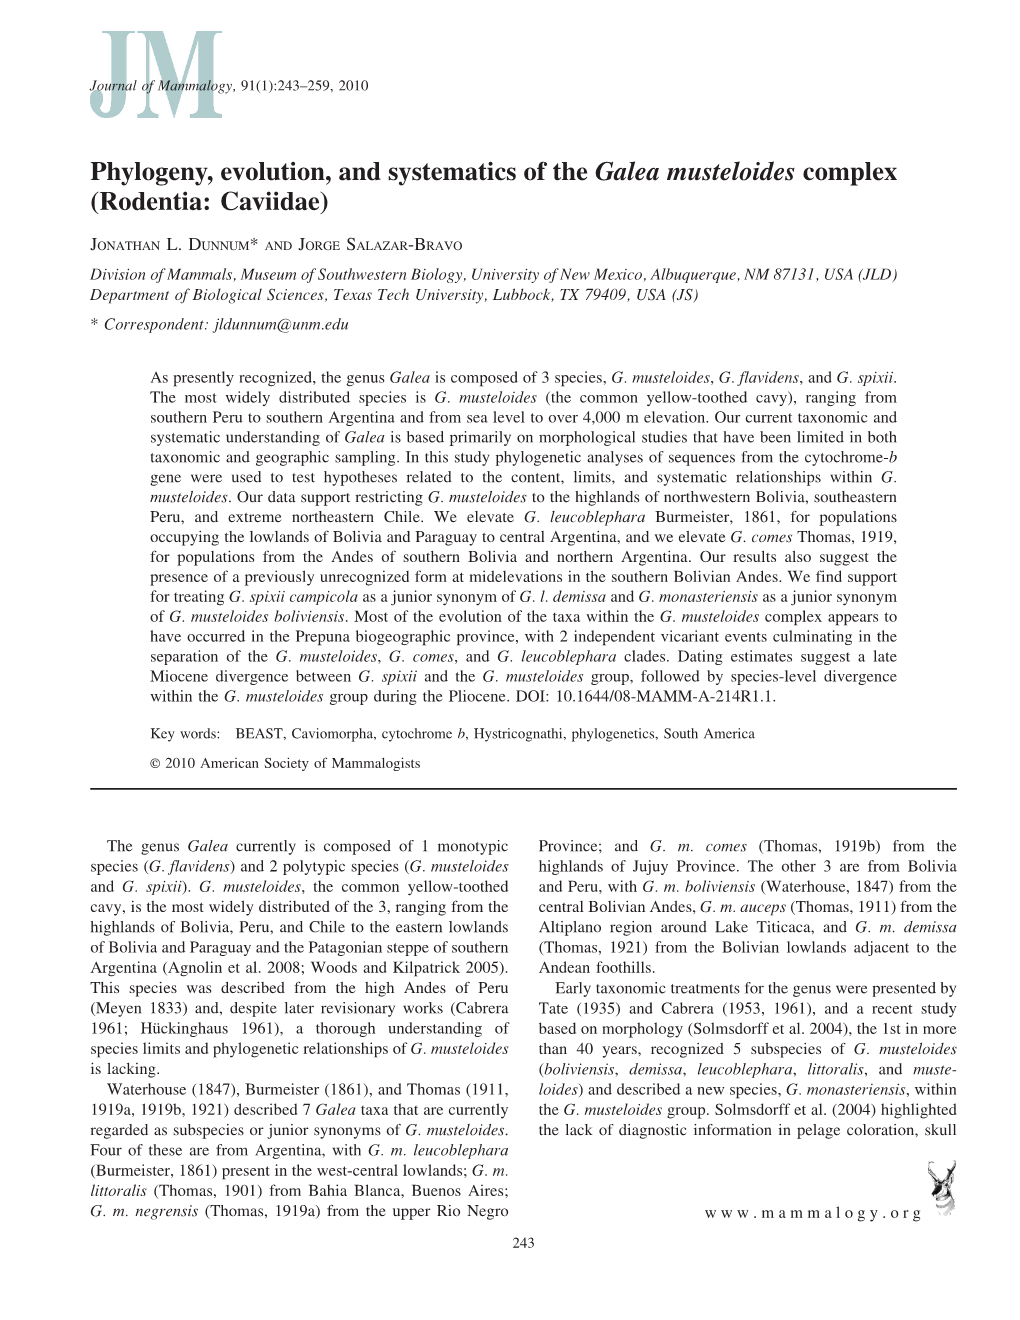 Phylogeny, Evolution, and Systematics of the Galea Musteloides Complex (Rodentia: Caviidae)